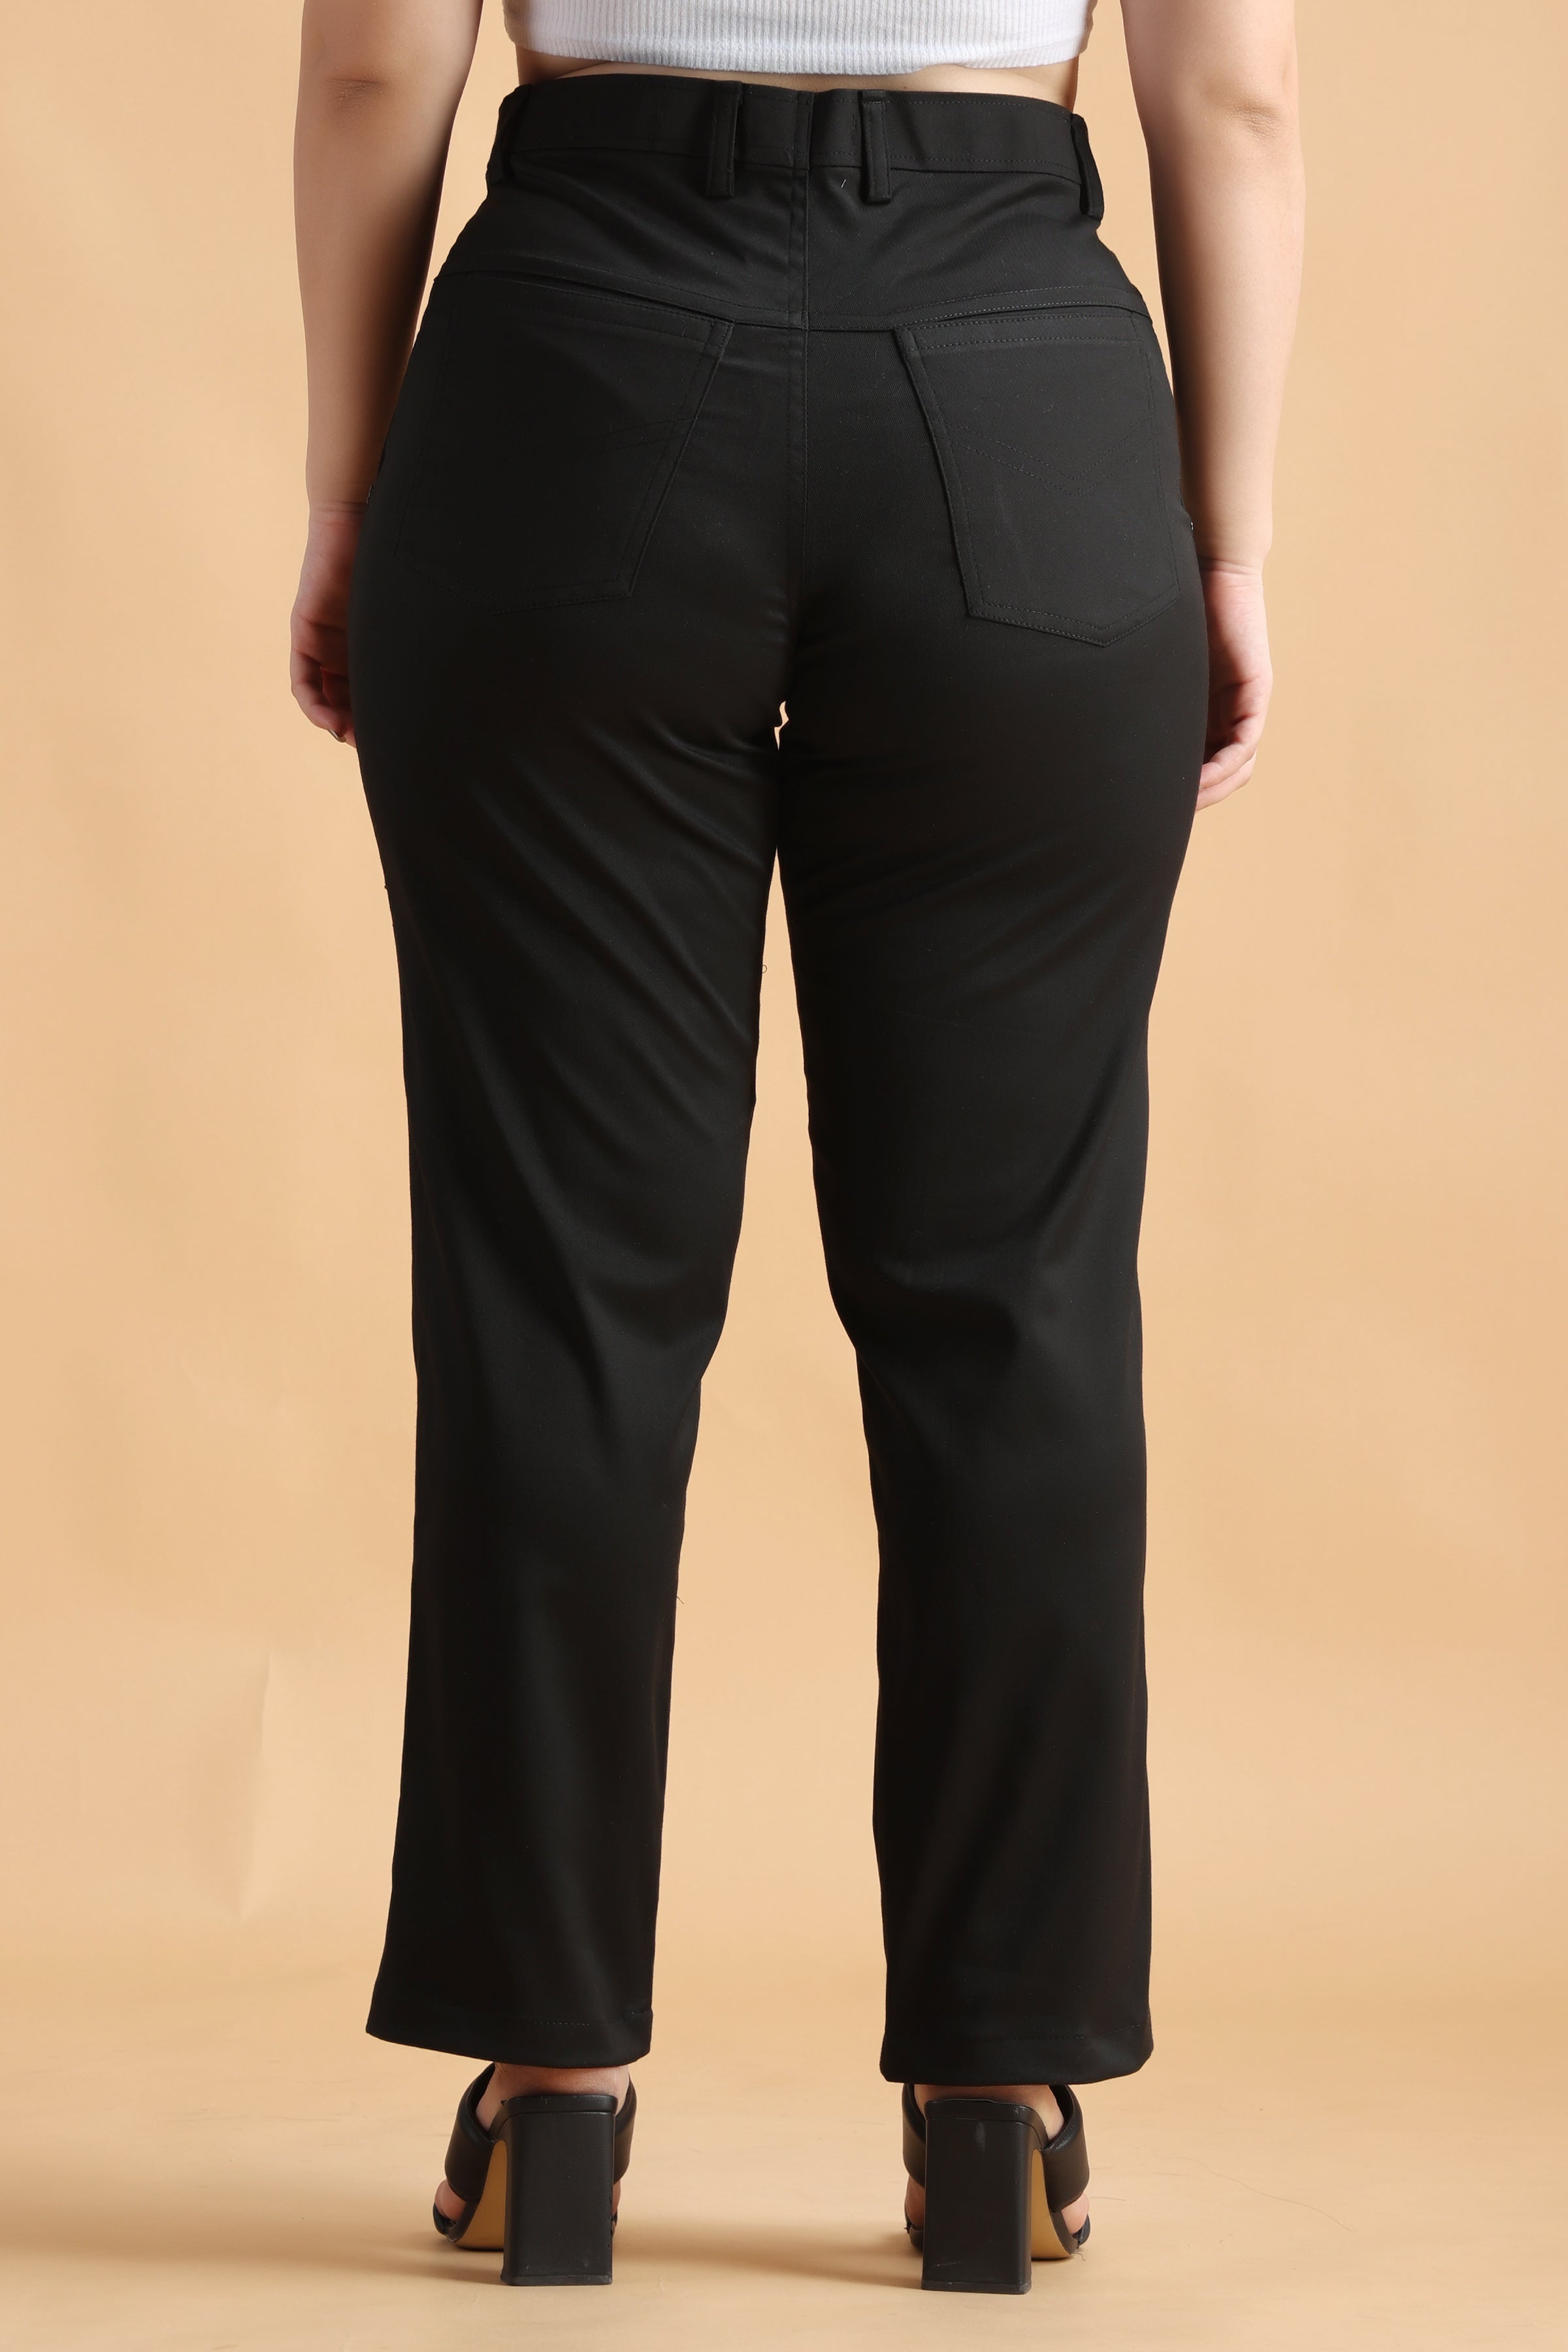 Buy Black Jeans  Pants for Women by THE MOM STORE Online  Ajiocom